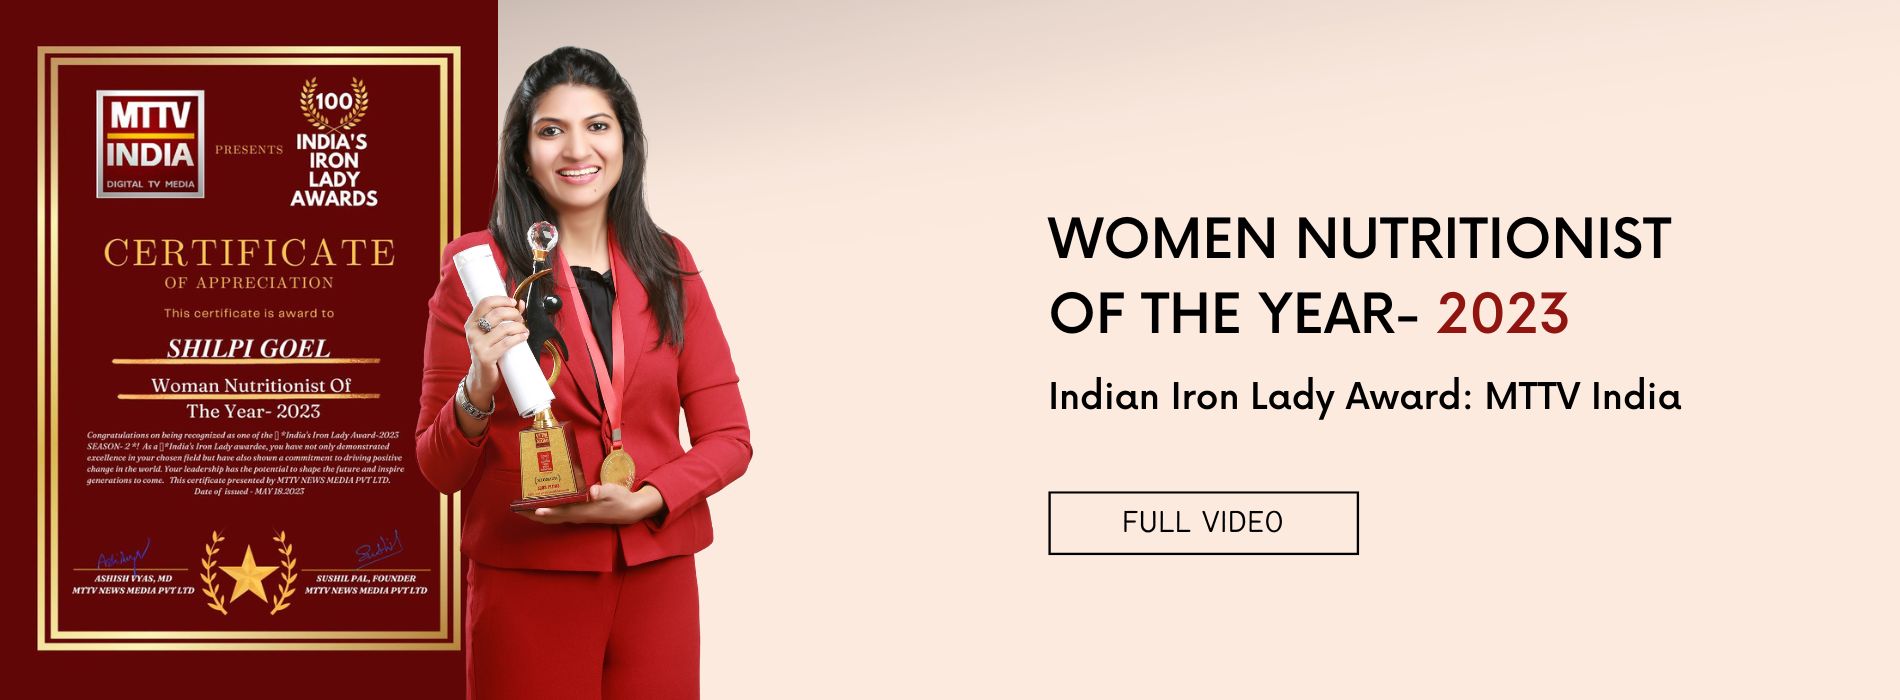 Women Nutritionist of the Year - 2023, Indian Iron Lady Awards: MTTV India